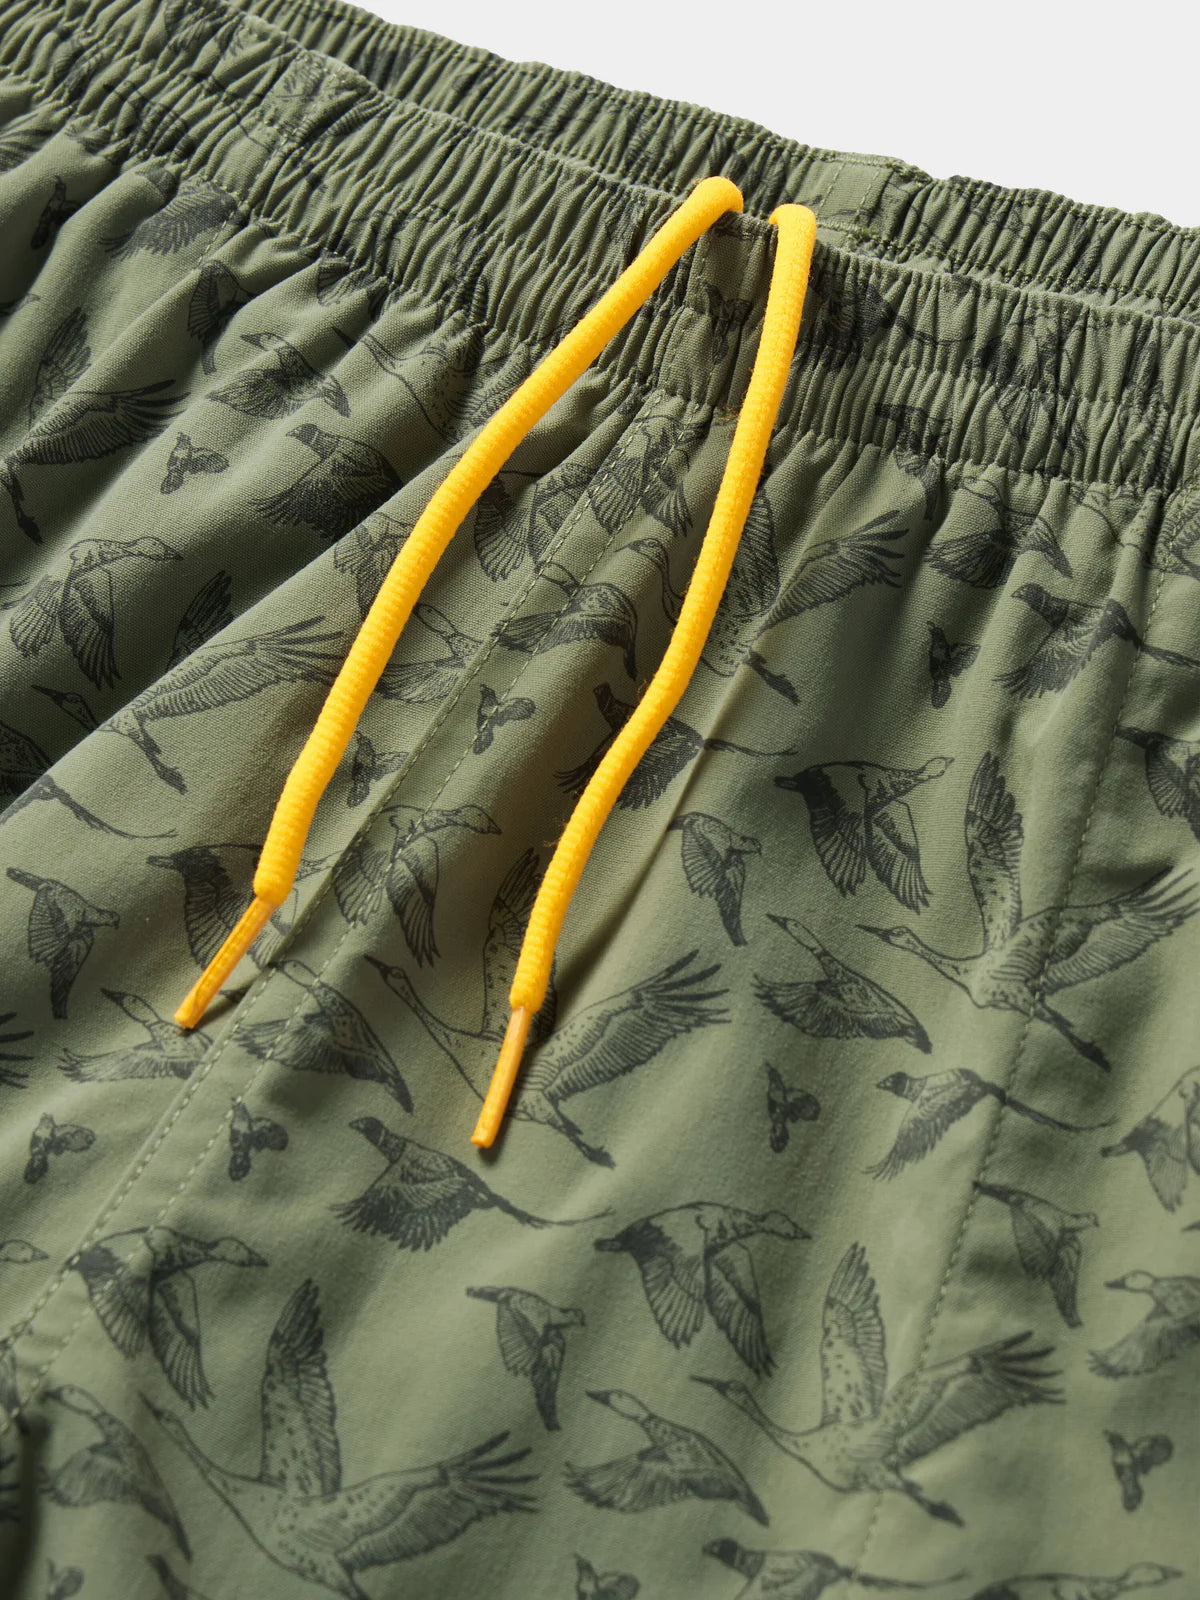 Scout Shorts 5" Inseam- Birds Of A Feather